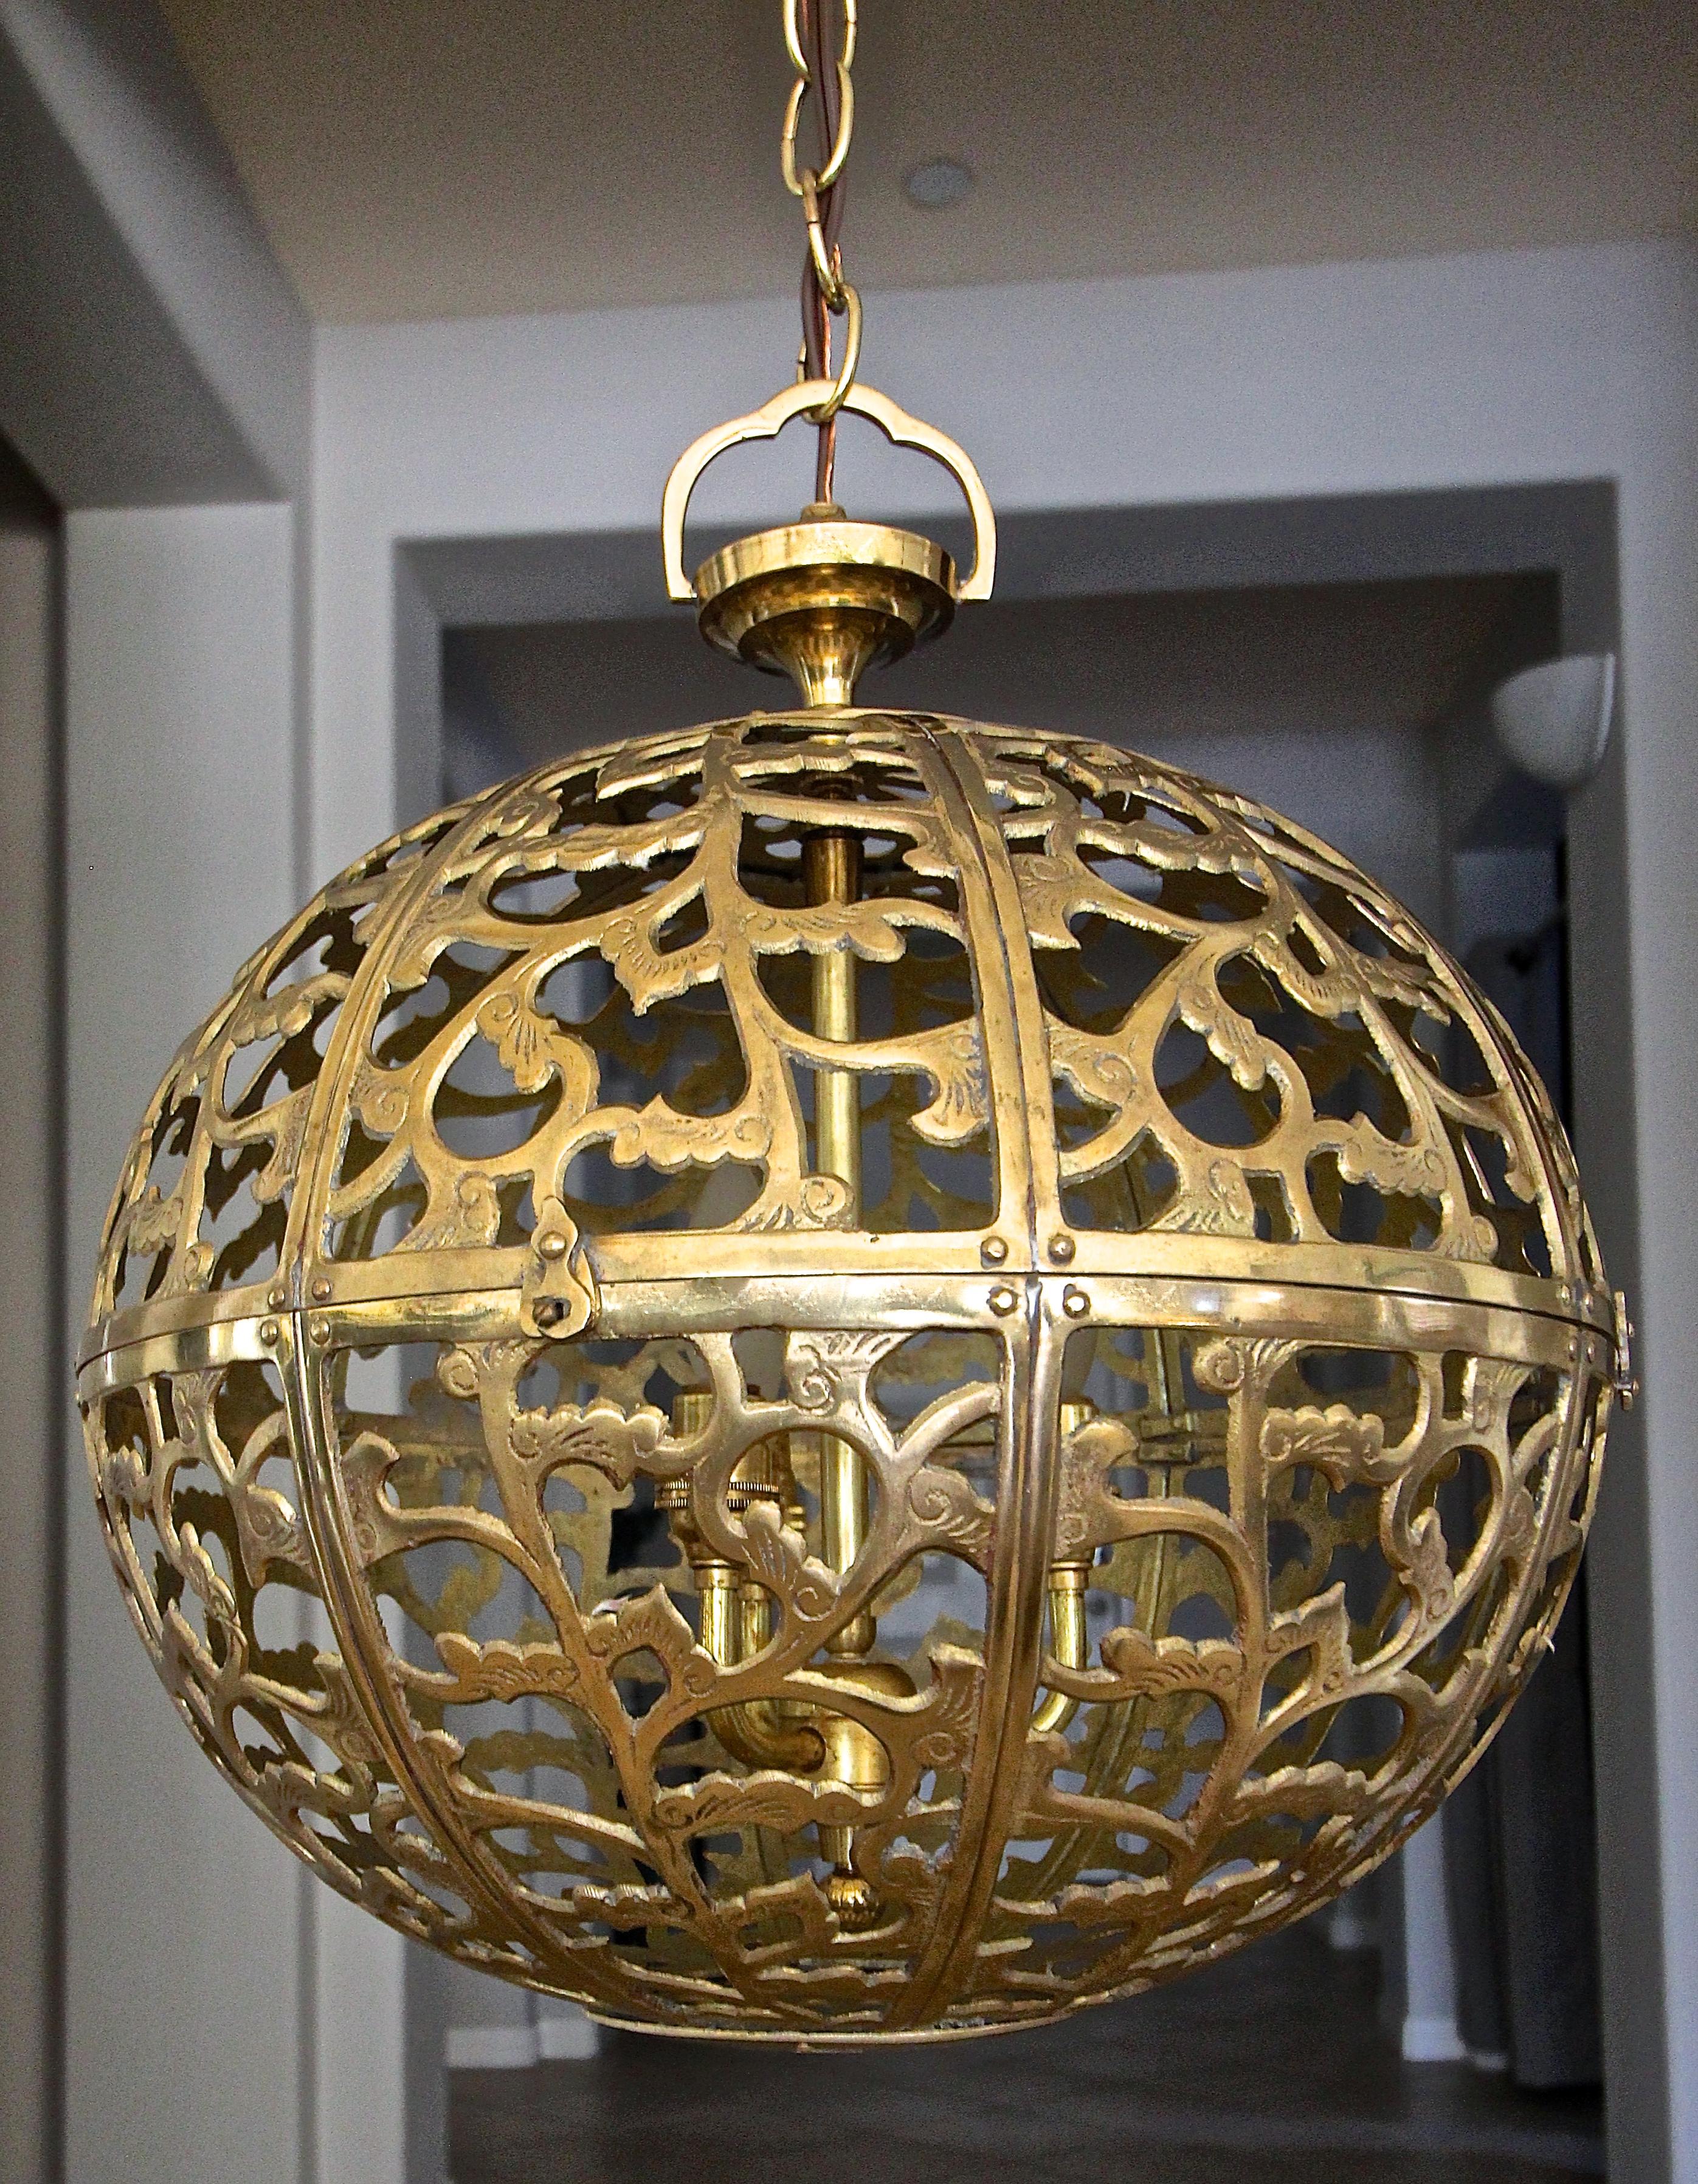 Brass pierced Asian chandelier or pendant light with scrolling arabesque pattern motif. Handcrafted from thick solid brass in Japan in the 1950s, this pendant has been refitted with a custom brass 3-light cluster for a more contemporary appeal.